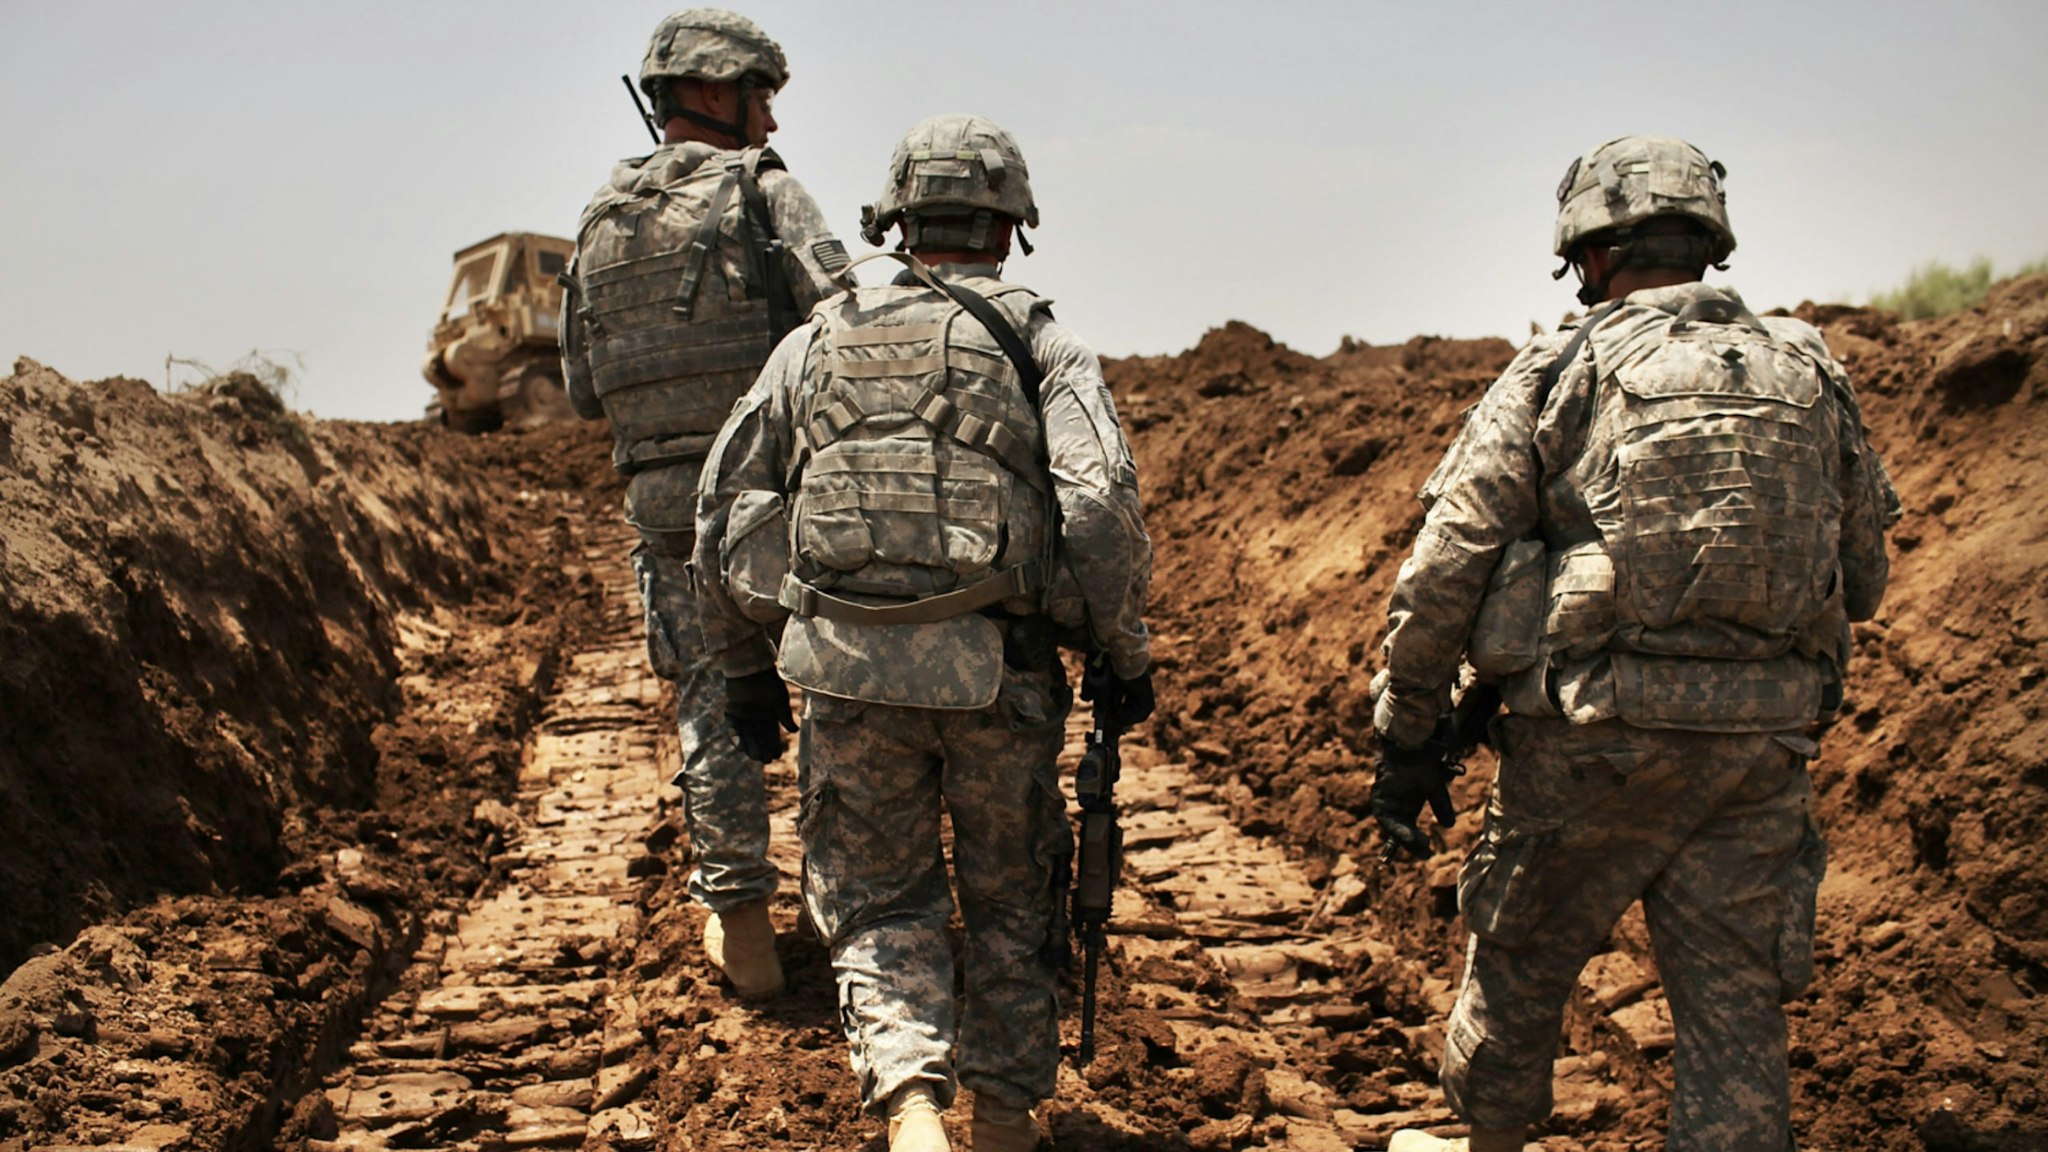 U.S. soldiers with the 3rd Armored Cavalry Regiment patrol a new ditch they have dug to protect the base from attack on July 19, 2011 in Iskandariya, Babil Province Iraq.